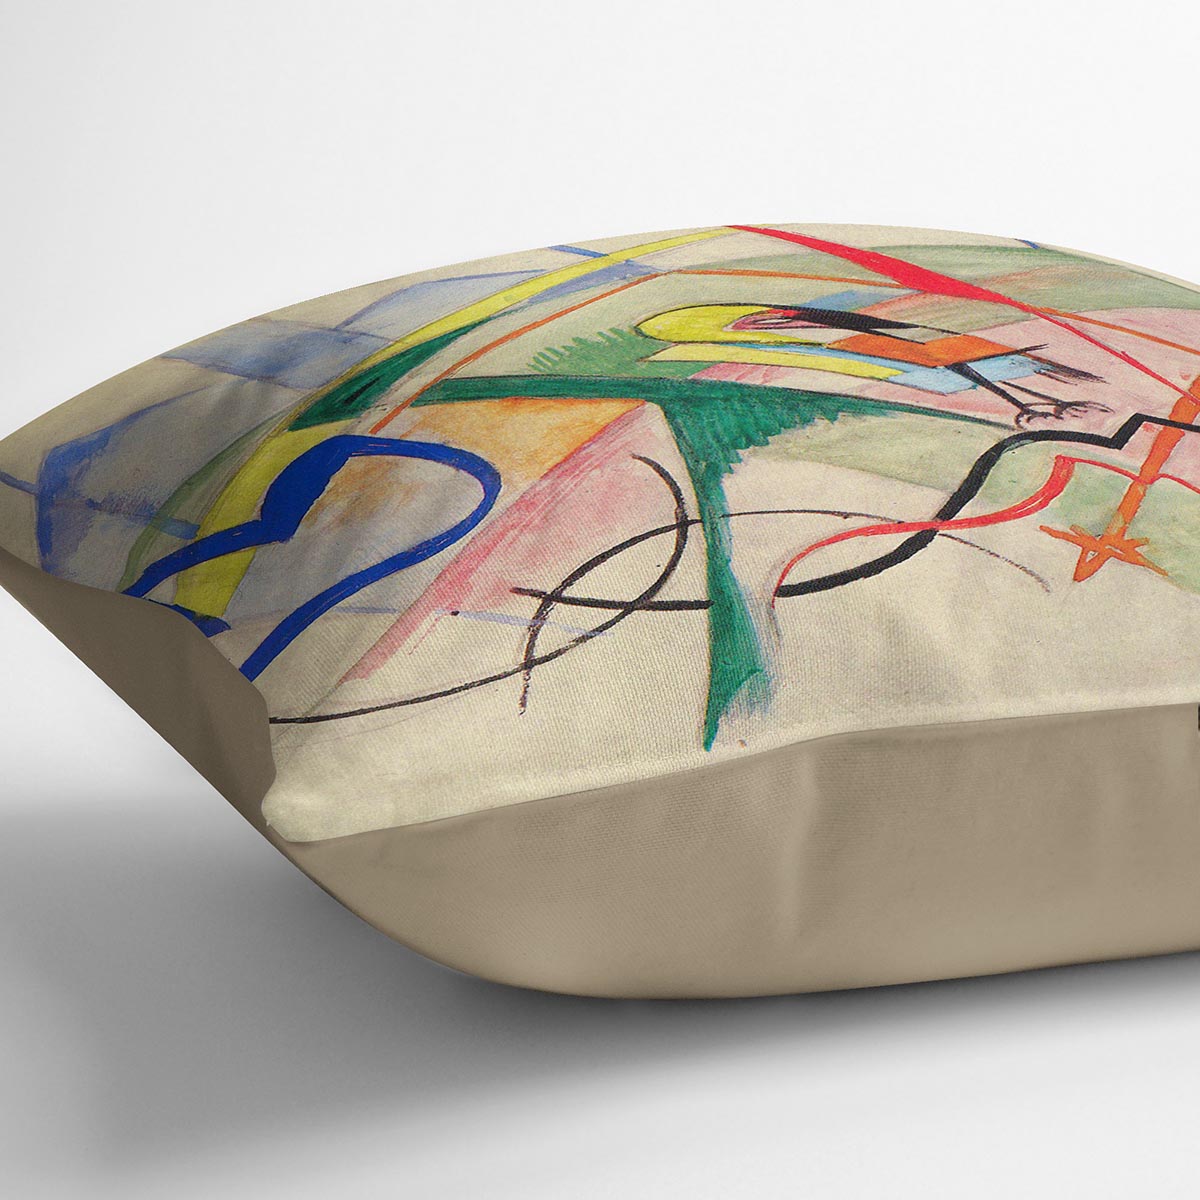 Small mythical creatures by Franz Marc Cushion